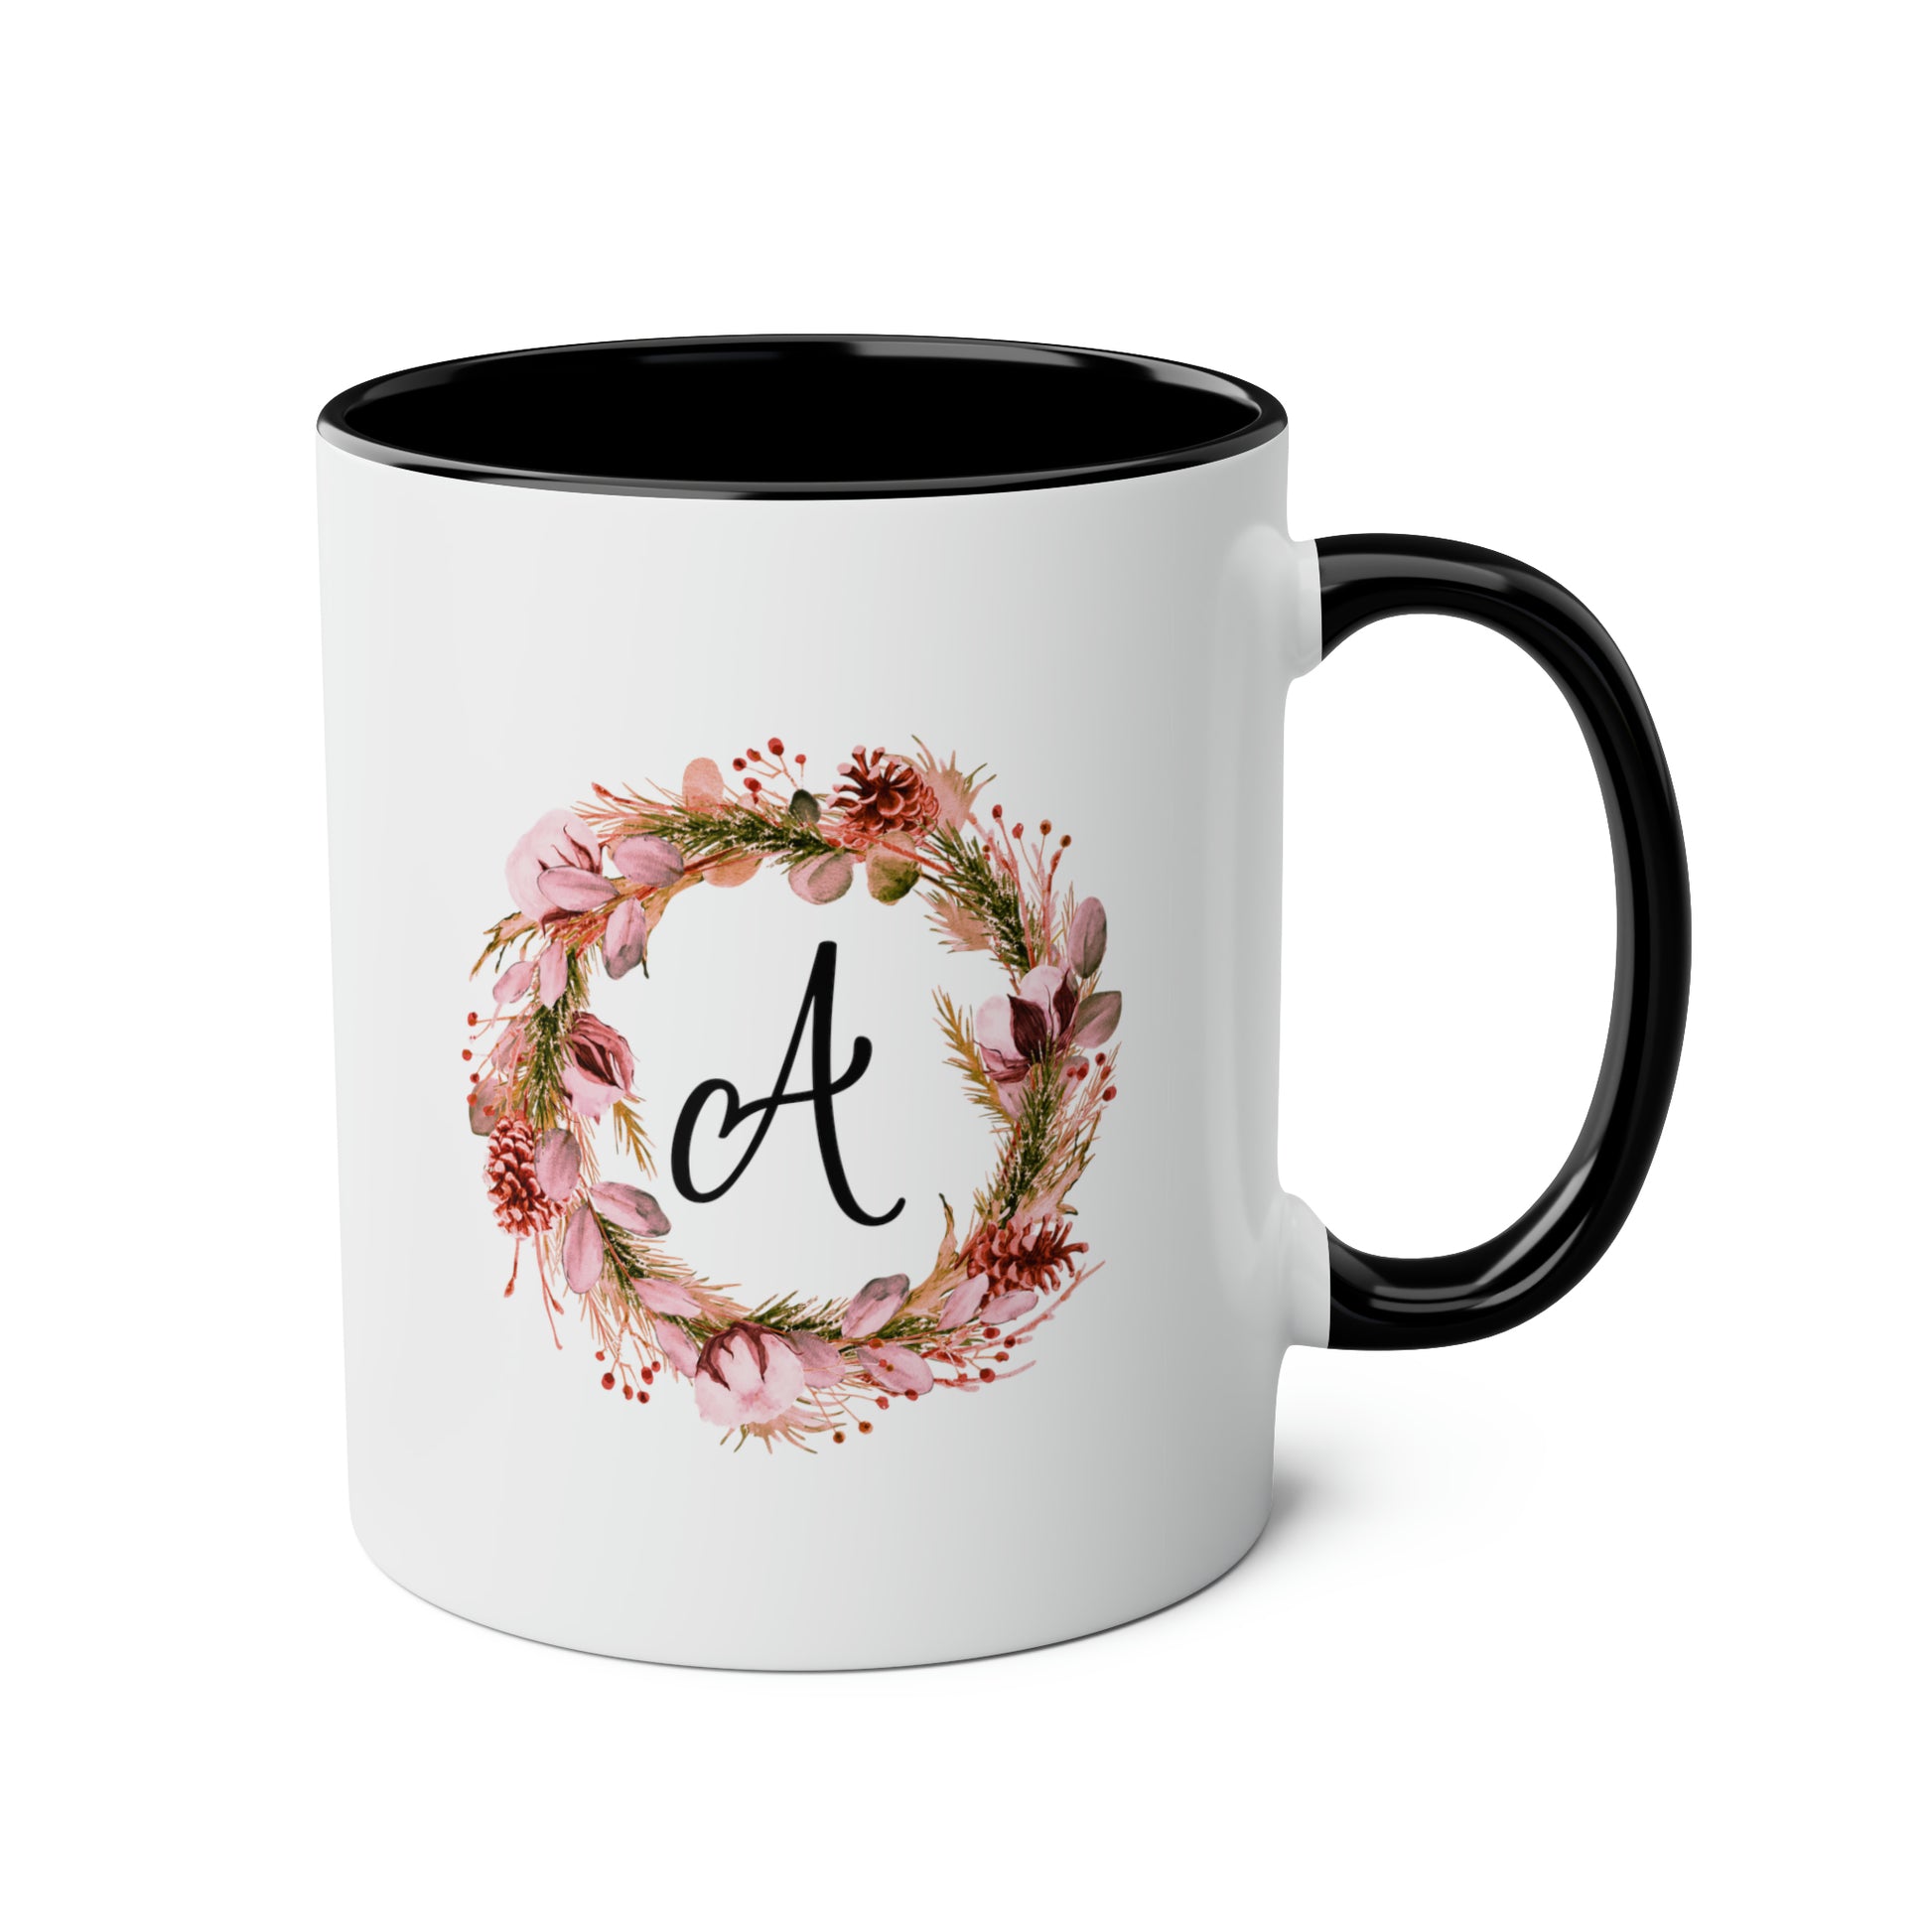 Bridesmaid Initial 11oz white with black accent funny large coffee mug gift for bridal shower party maid of honor custom cup personalized name letter waveywares wavey wares wavywares wavy wares